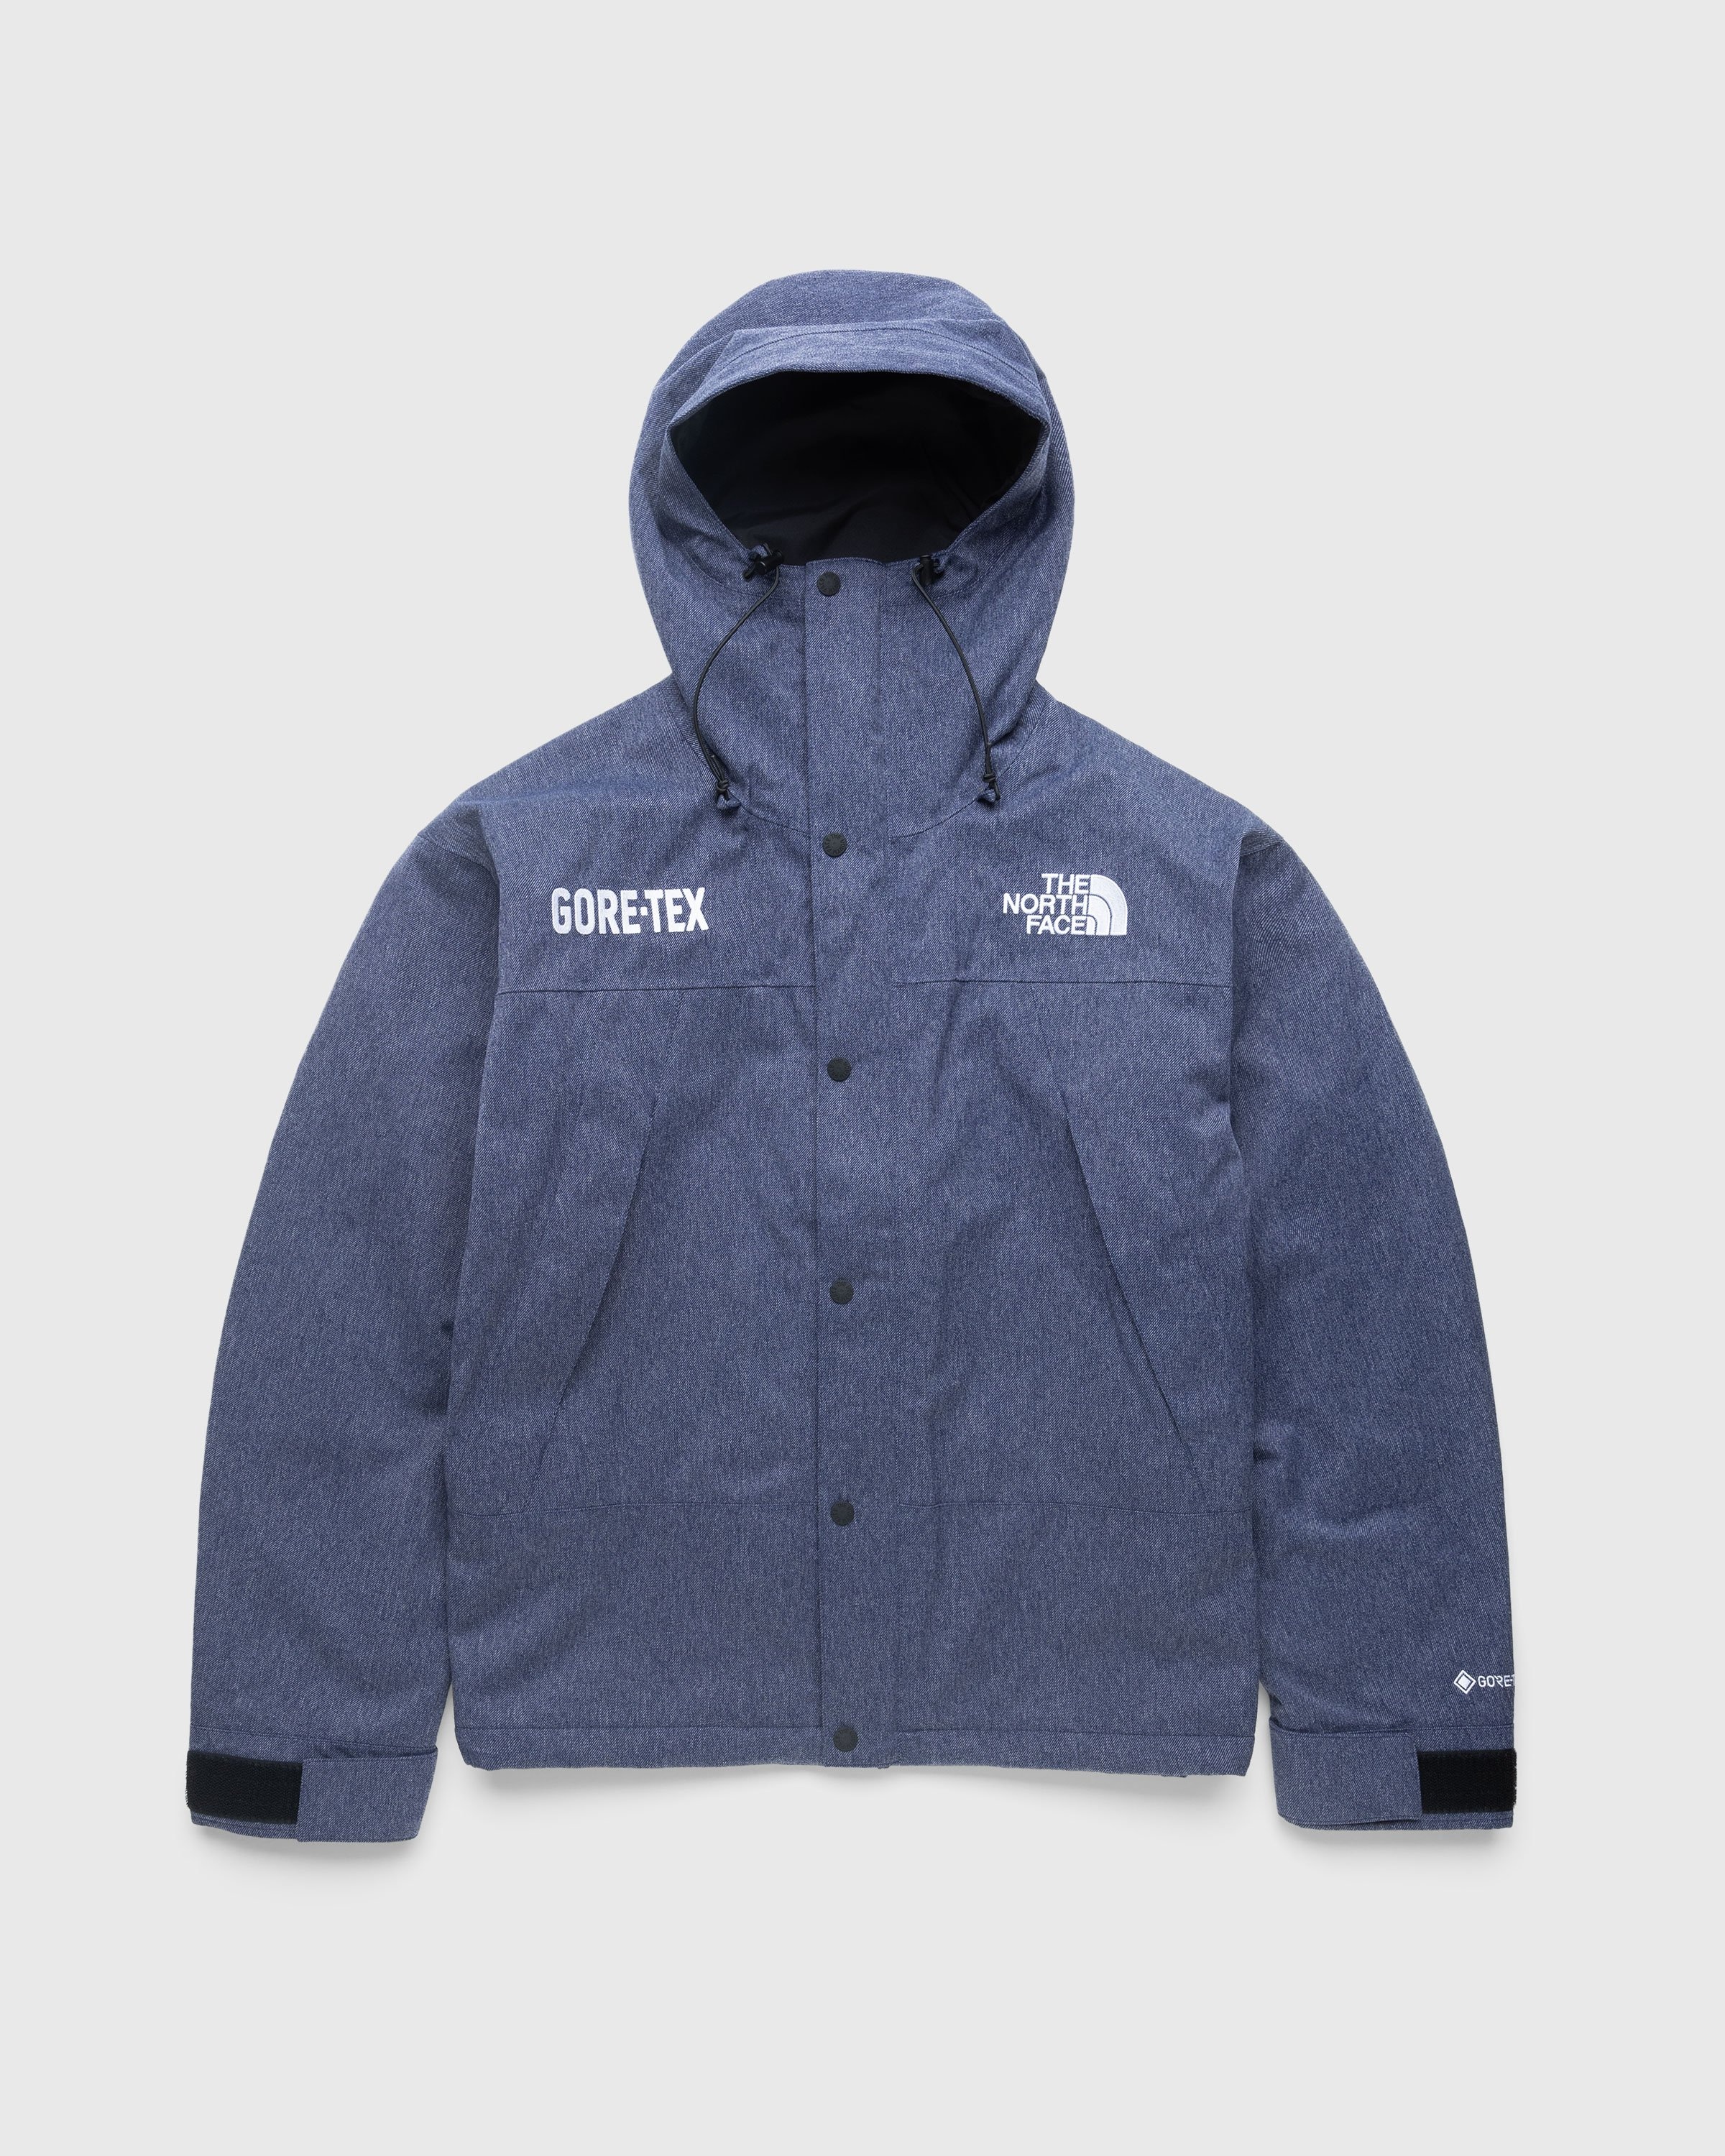 The North Face – GORE-TEX Mountain Jacket Denim Blue/TNF Black - Outerwear - Blue - Image 1